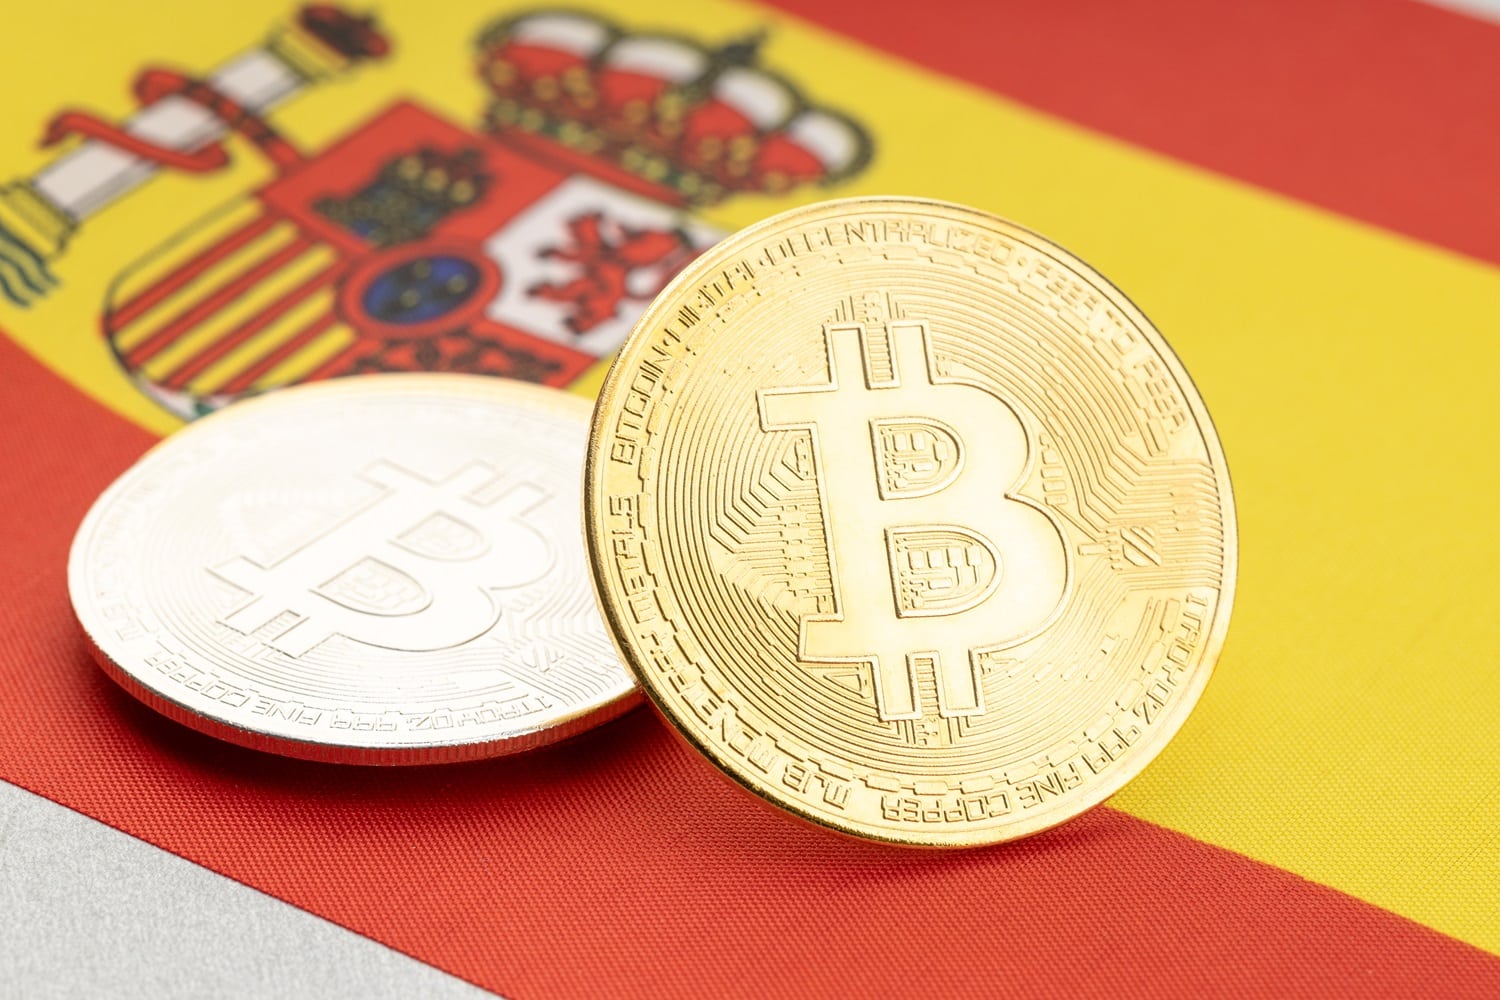 Metal coins intended to represent Bitcoin rest on the national flag of Spain.